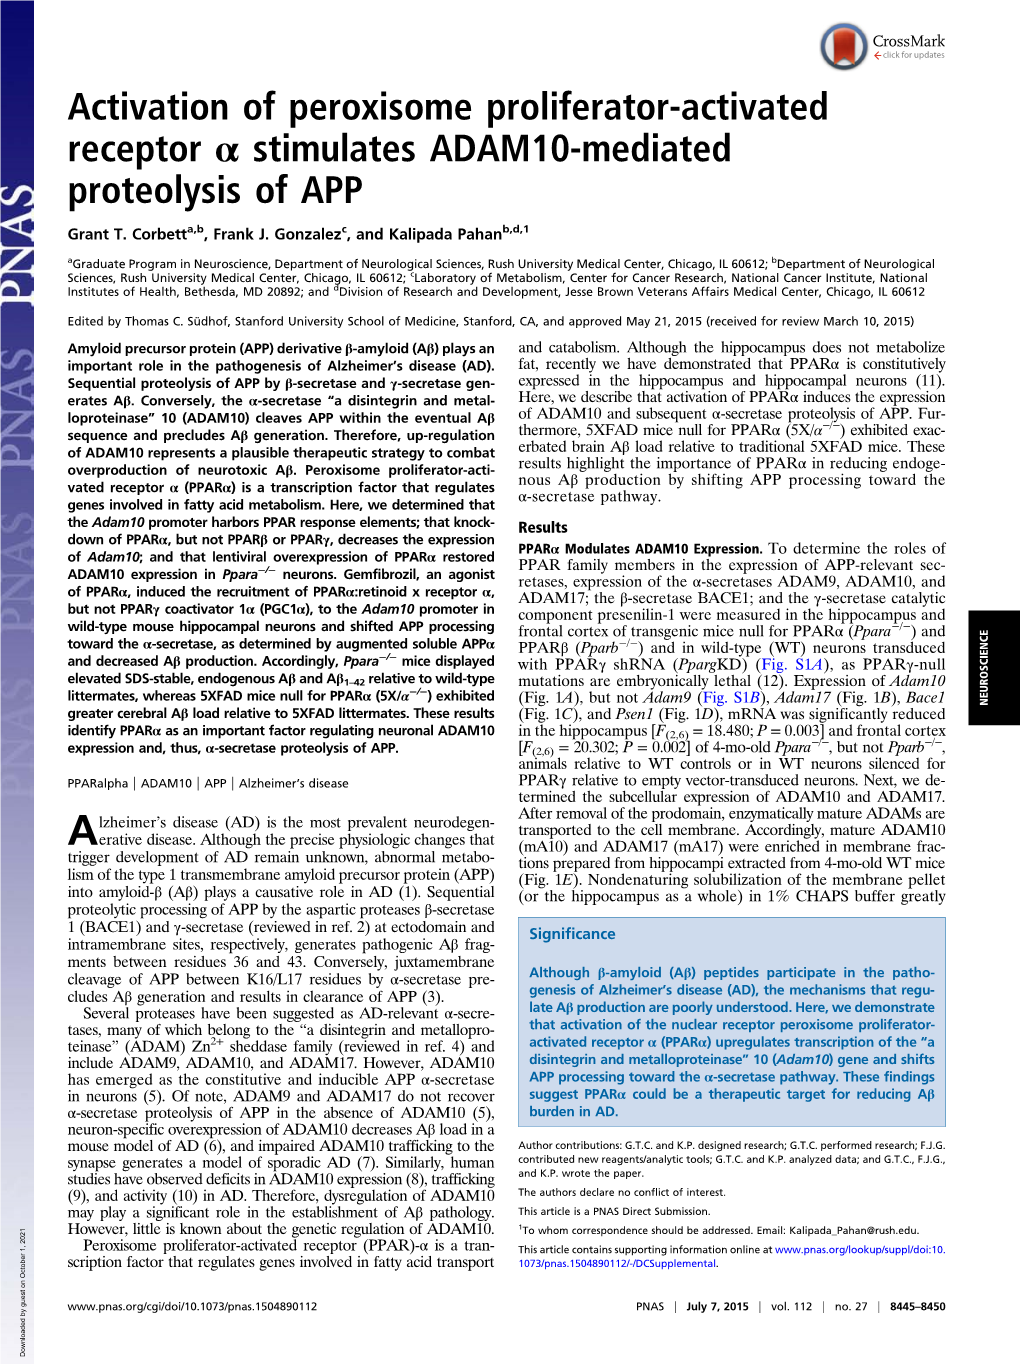 Activation of Peroxisome Proliferator-Activated Receptor Α Stimulates ADAM10-Mediated Proteolysis of APP